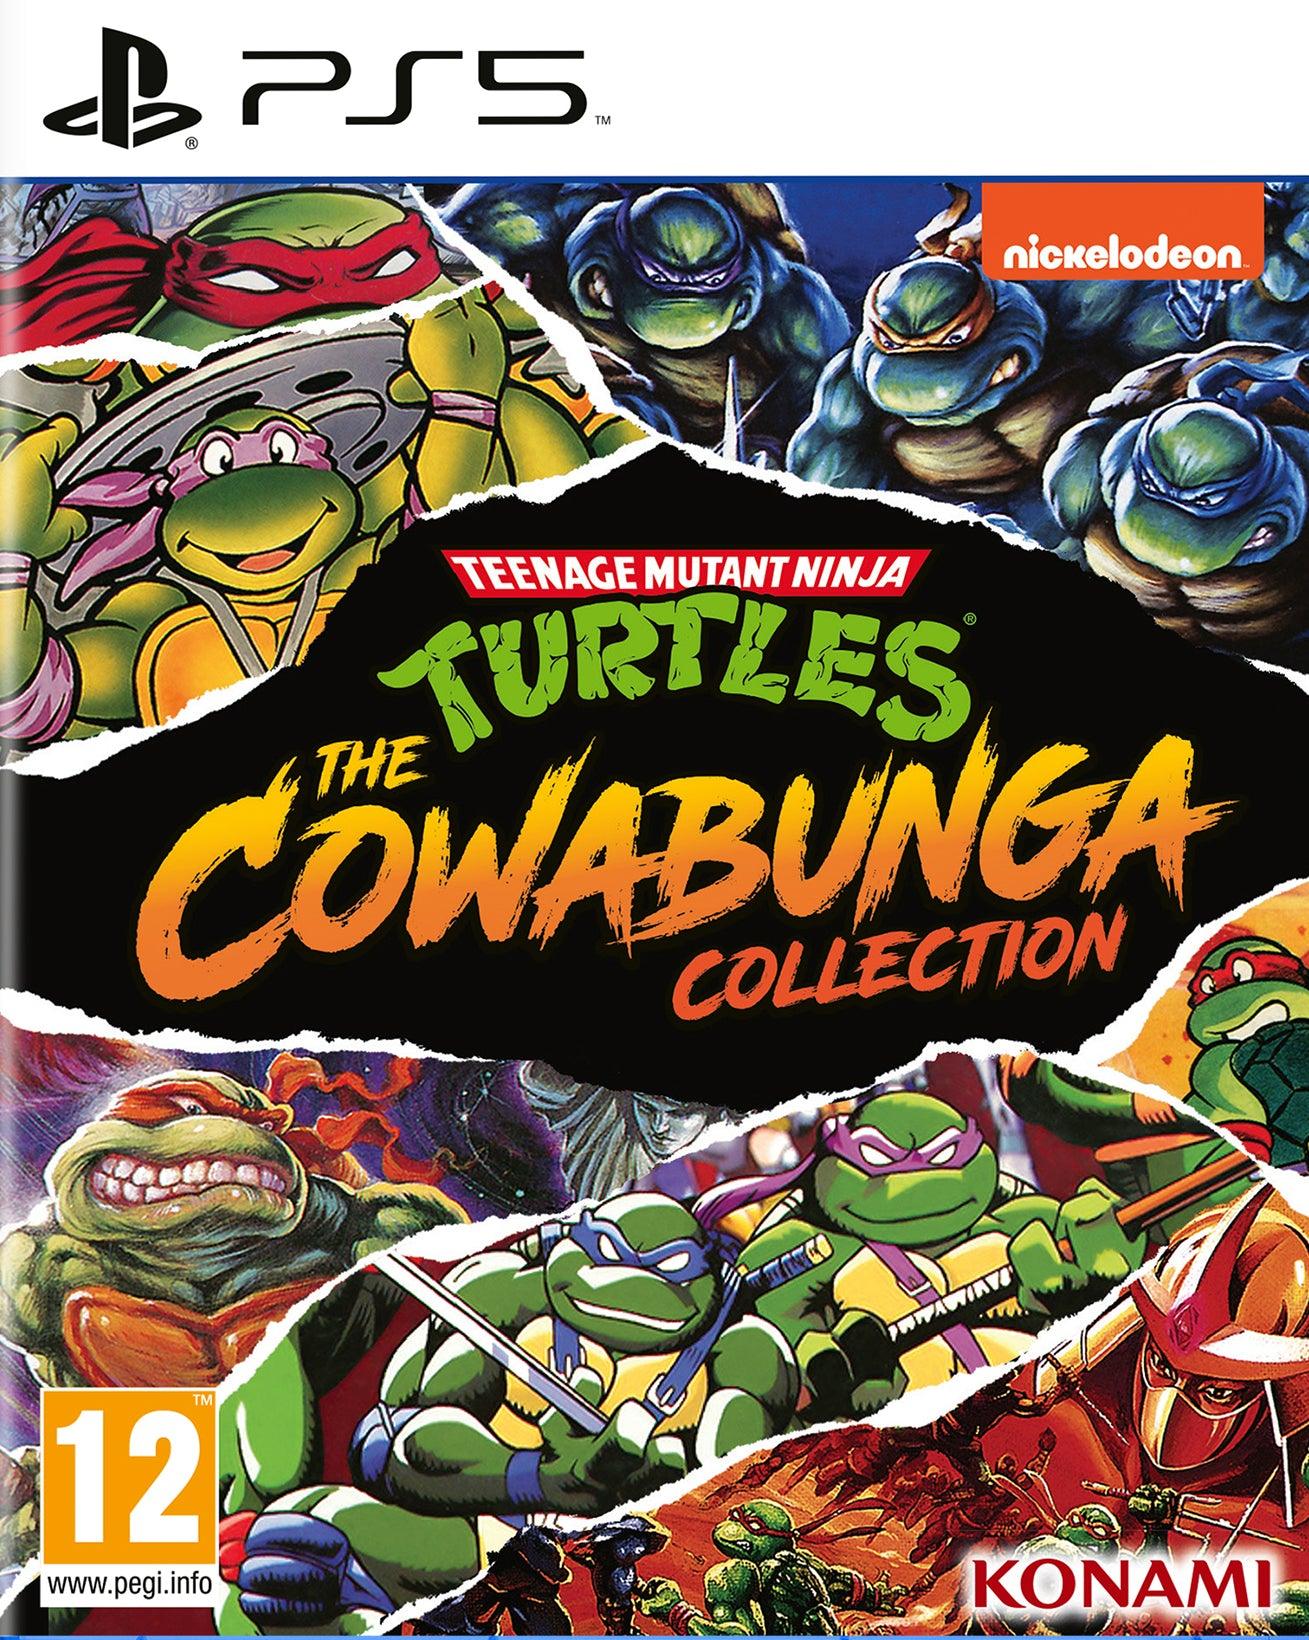 Tmnt Cowabunga Collection - Want a New Gadget